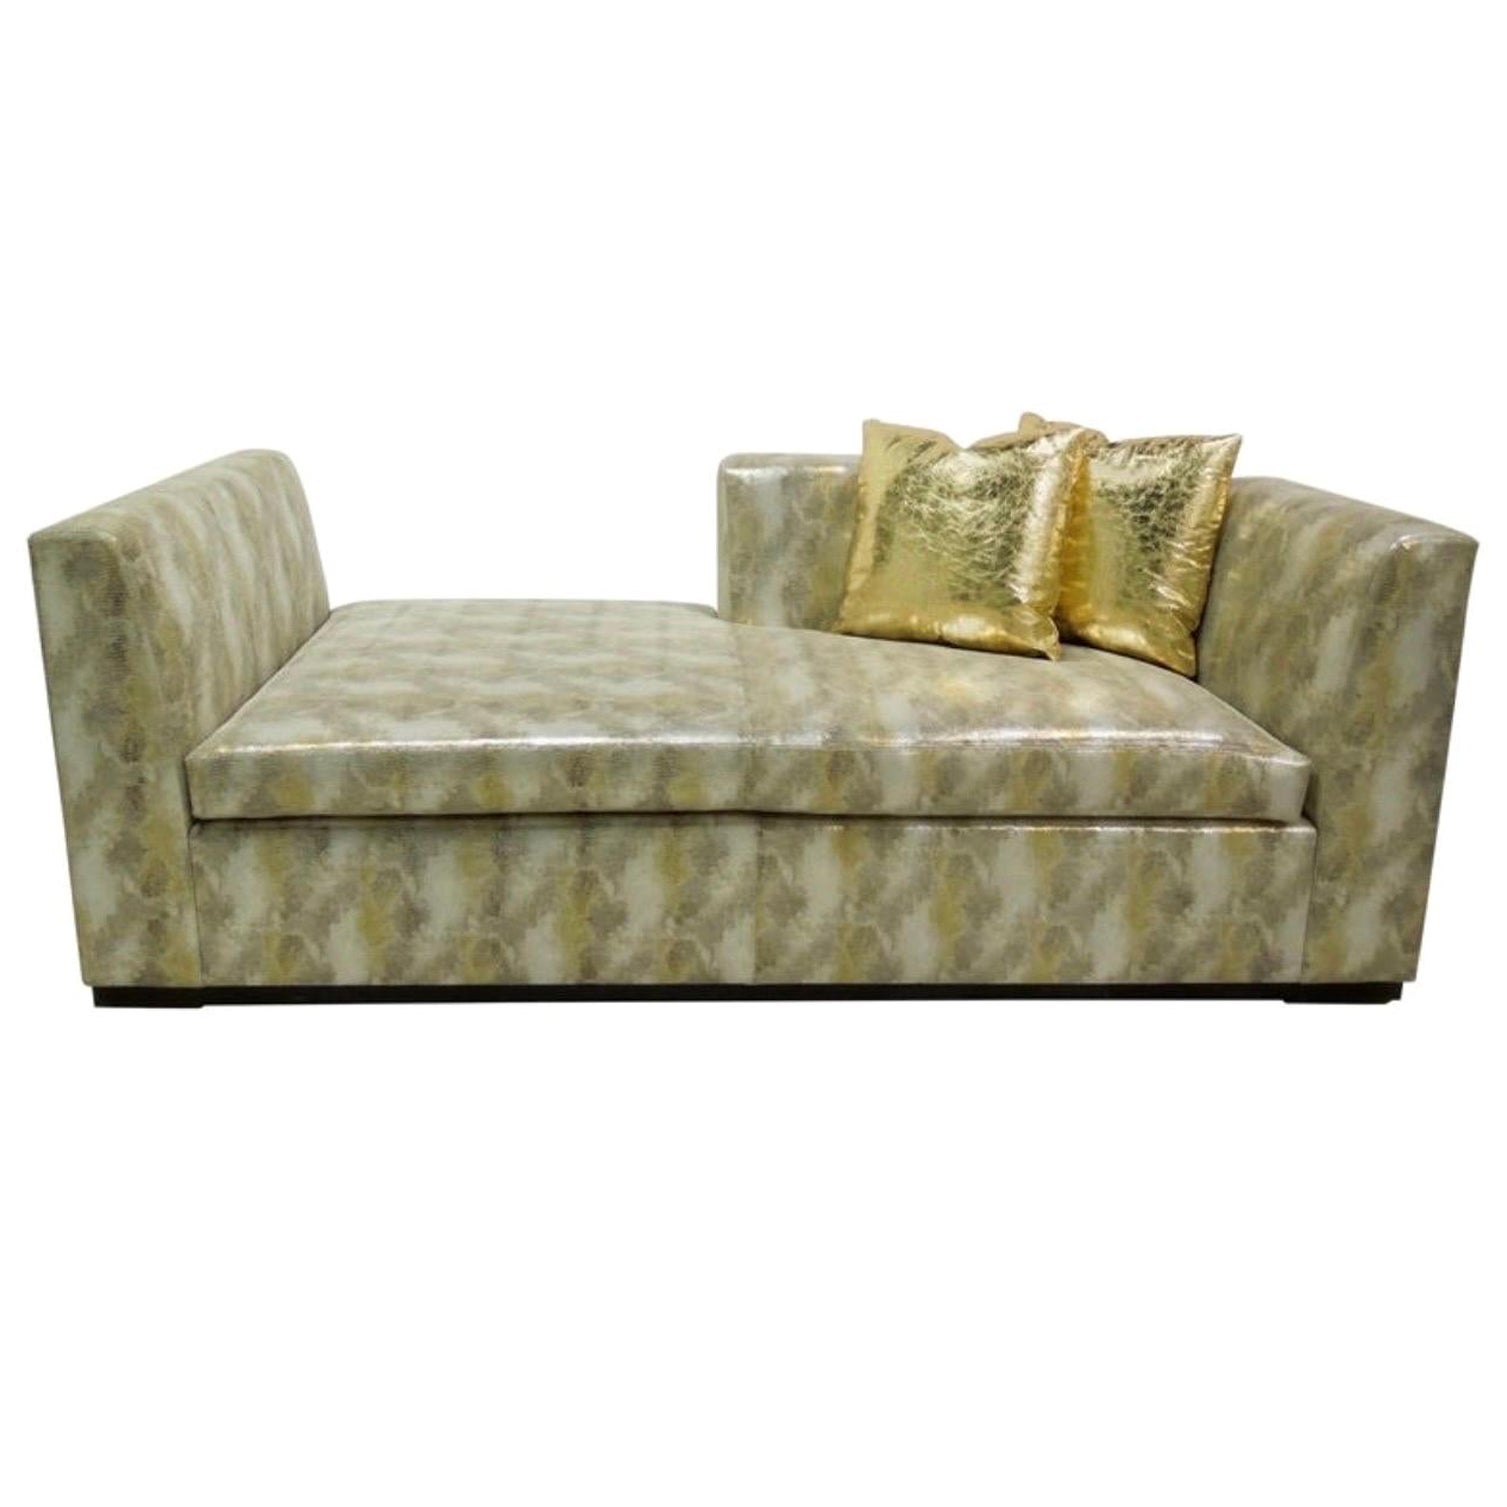 Modern Metallic Silver and Gold Leather Chaise Lounge Custom Made For Sale